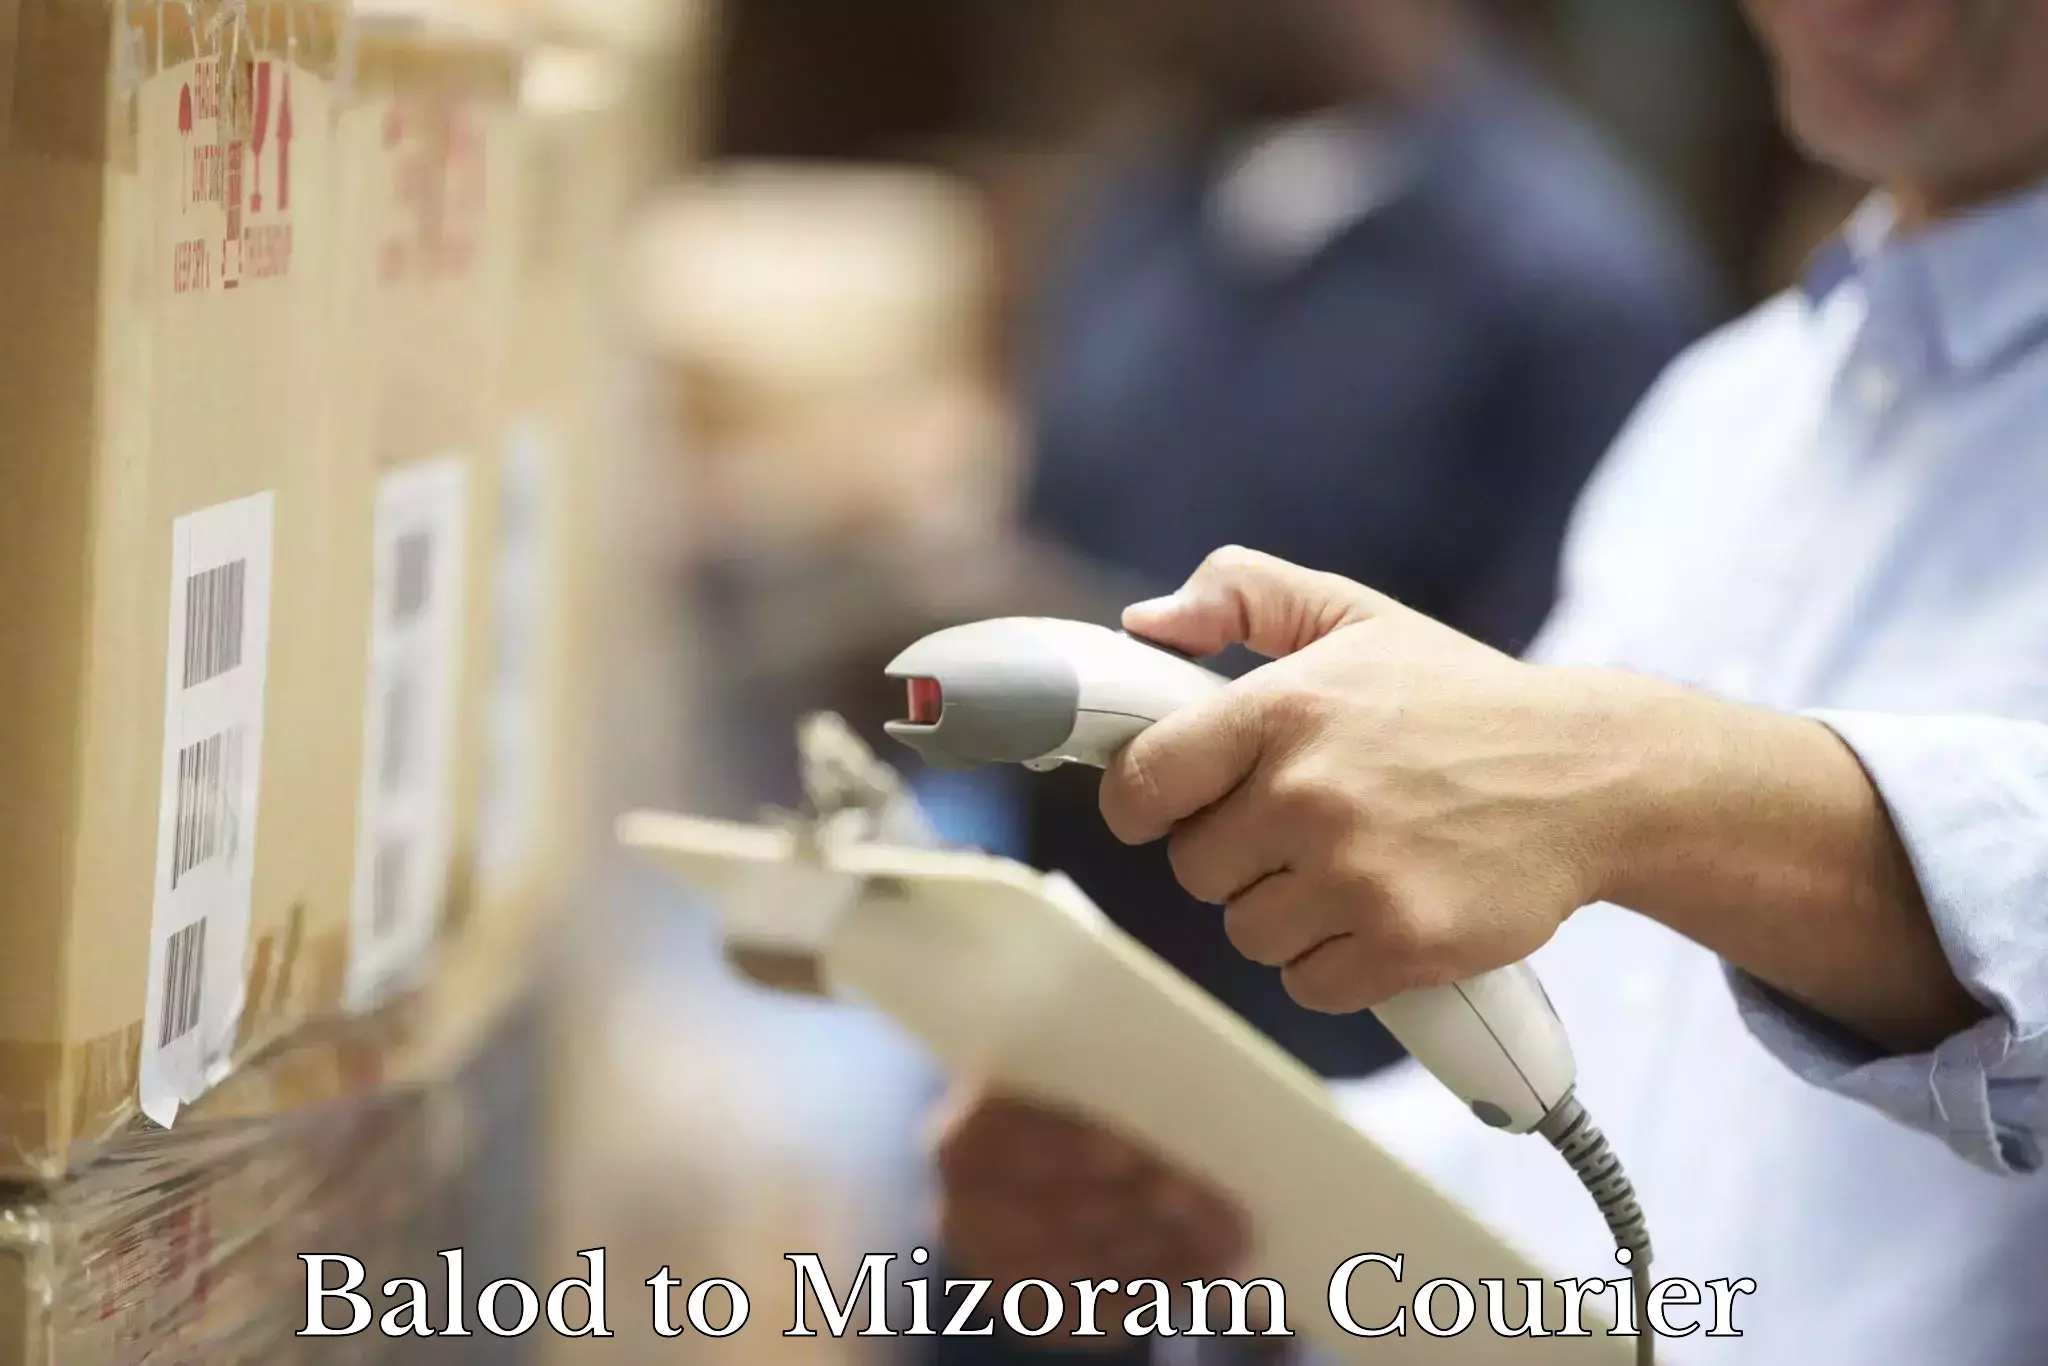 On-call courier service Balod to Mizoram